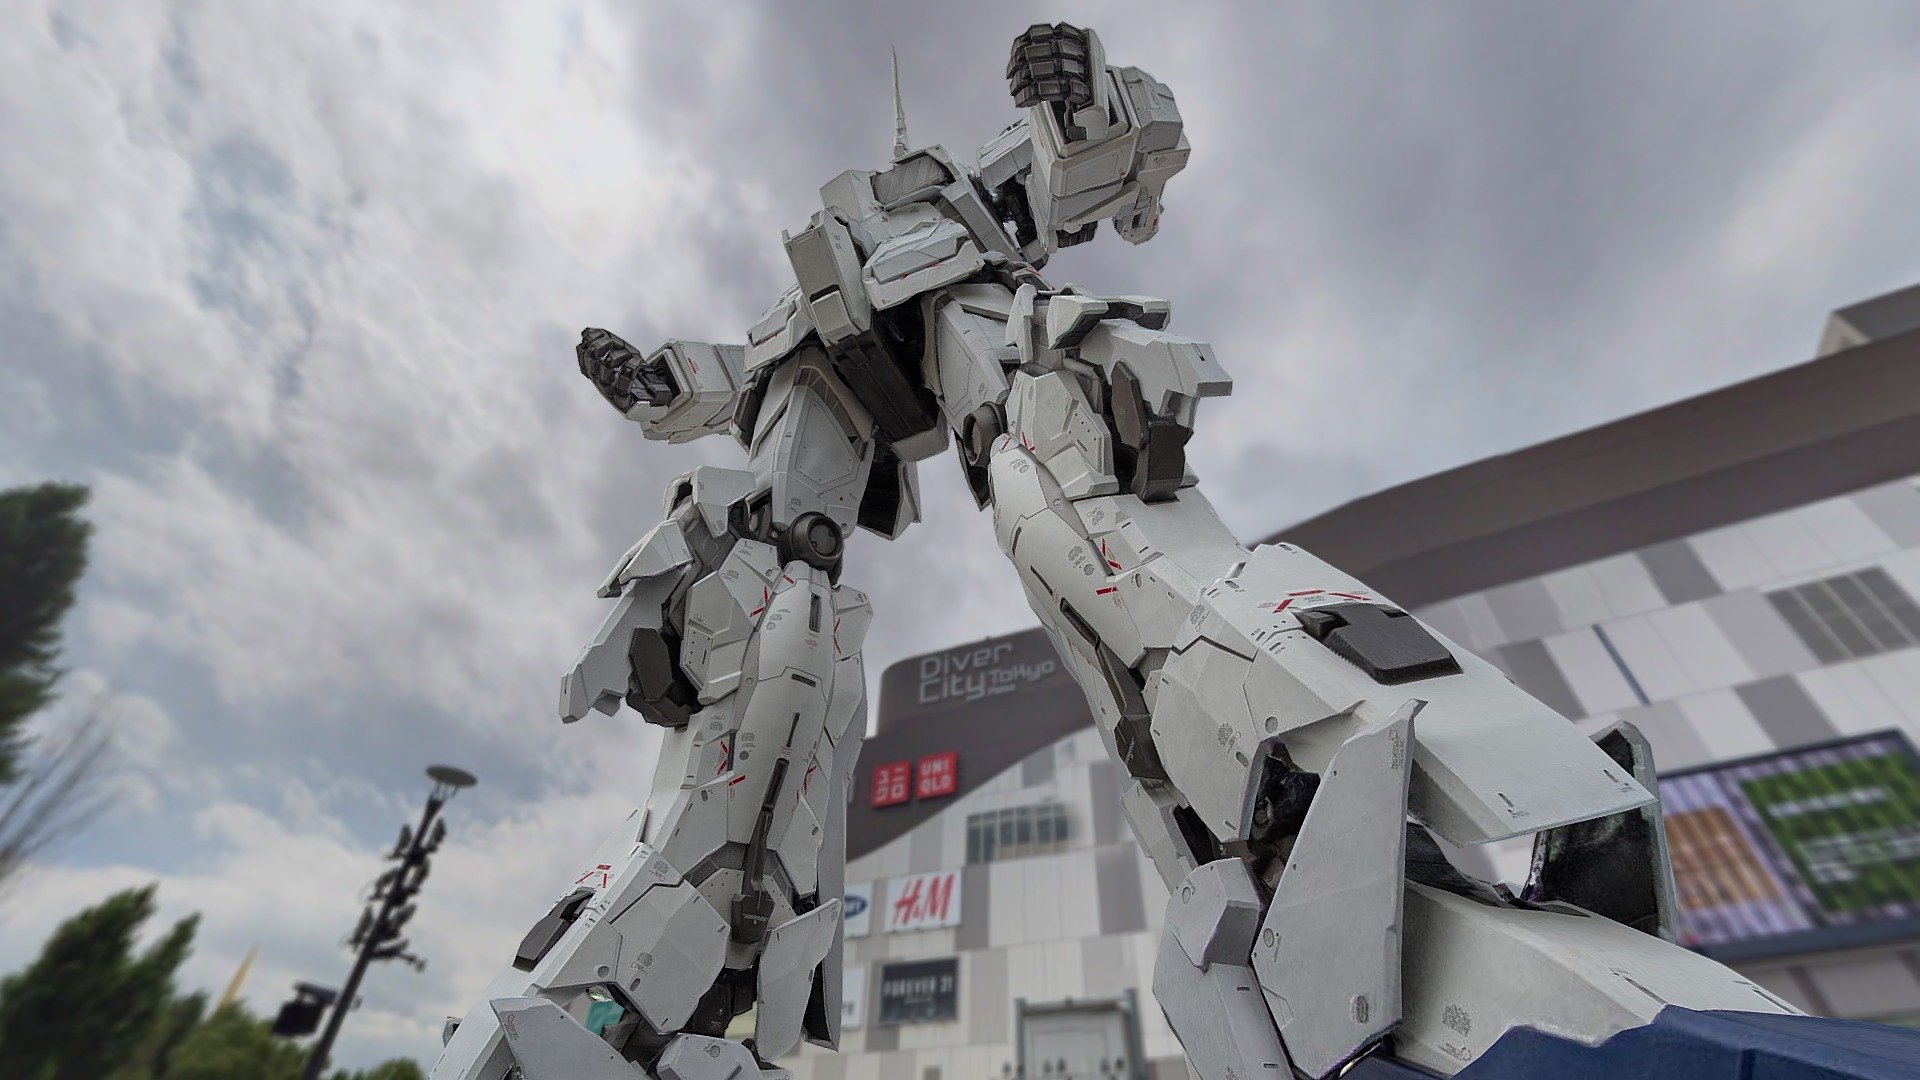 The model is a replication of the RX-0 Unicorn Gundam from the novel and OVA Mobile Suit Gundam Unicorn. This grand display stands at 19.7 meters tall. The Gundam is normally in Unicorn mode, marked by a white frame with a single antenna protruding from its head. At specified times, however, you can see the Gundam in Destroy mode, where its frame expands and emits a pink glow 3d model